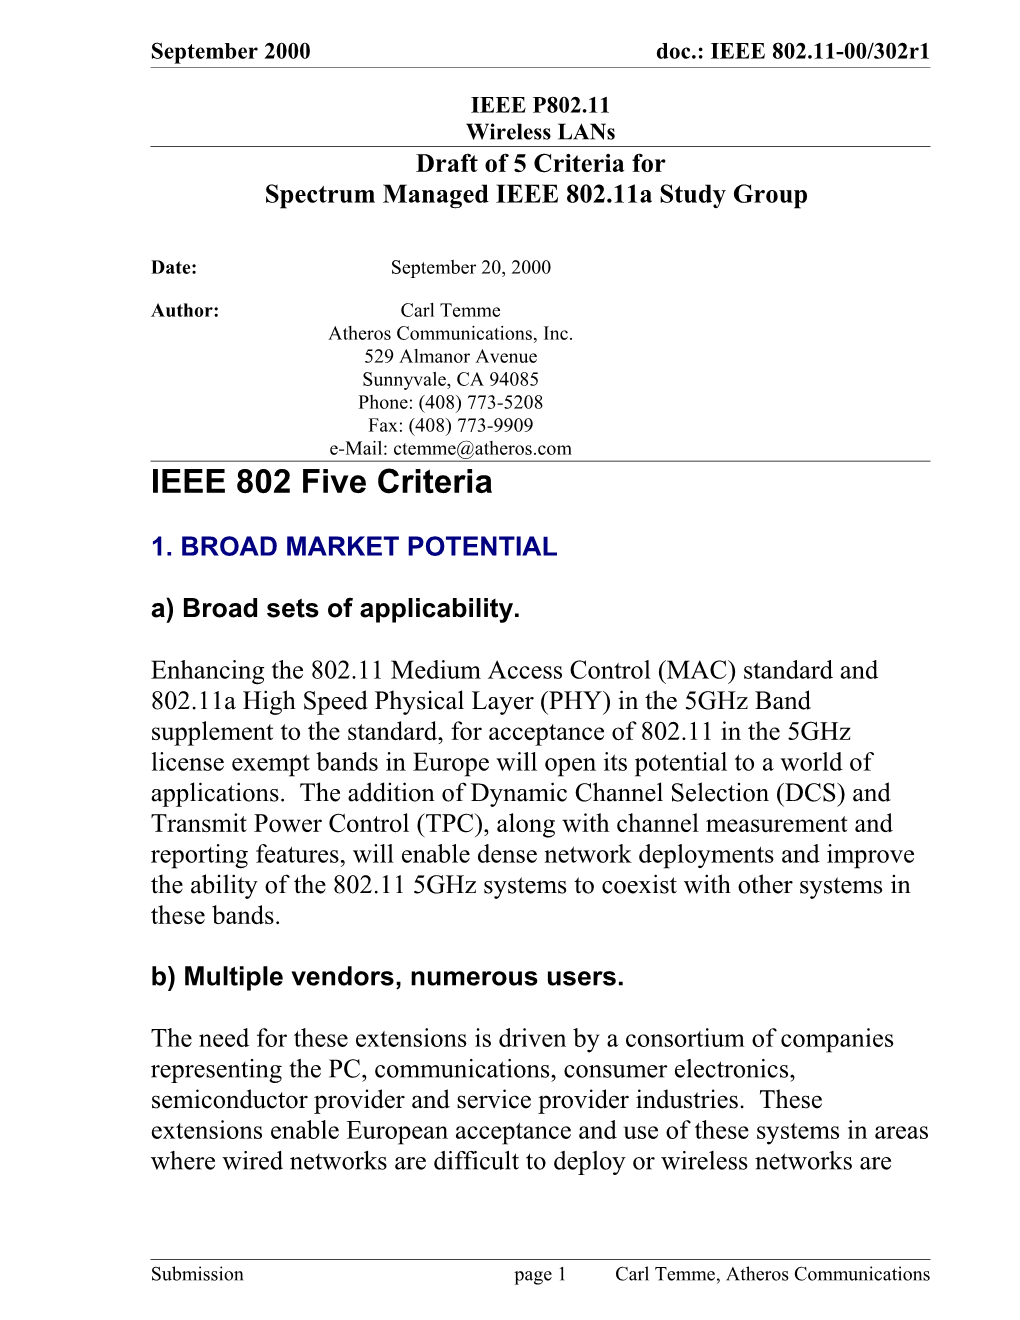 Spectrum Managed IEEE 802.11A Study Group